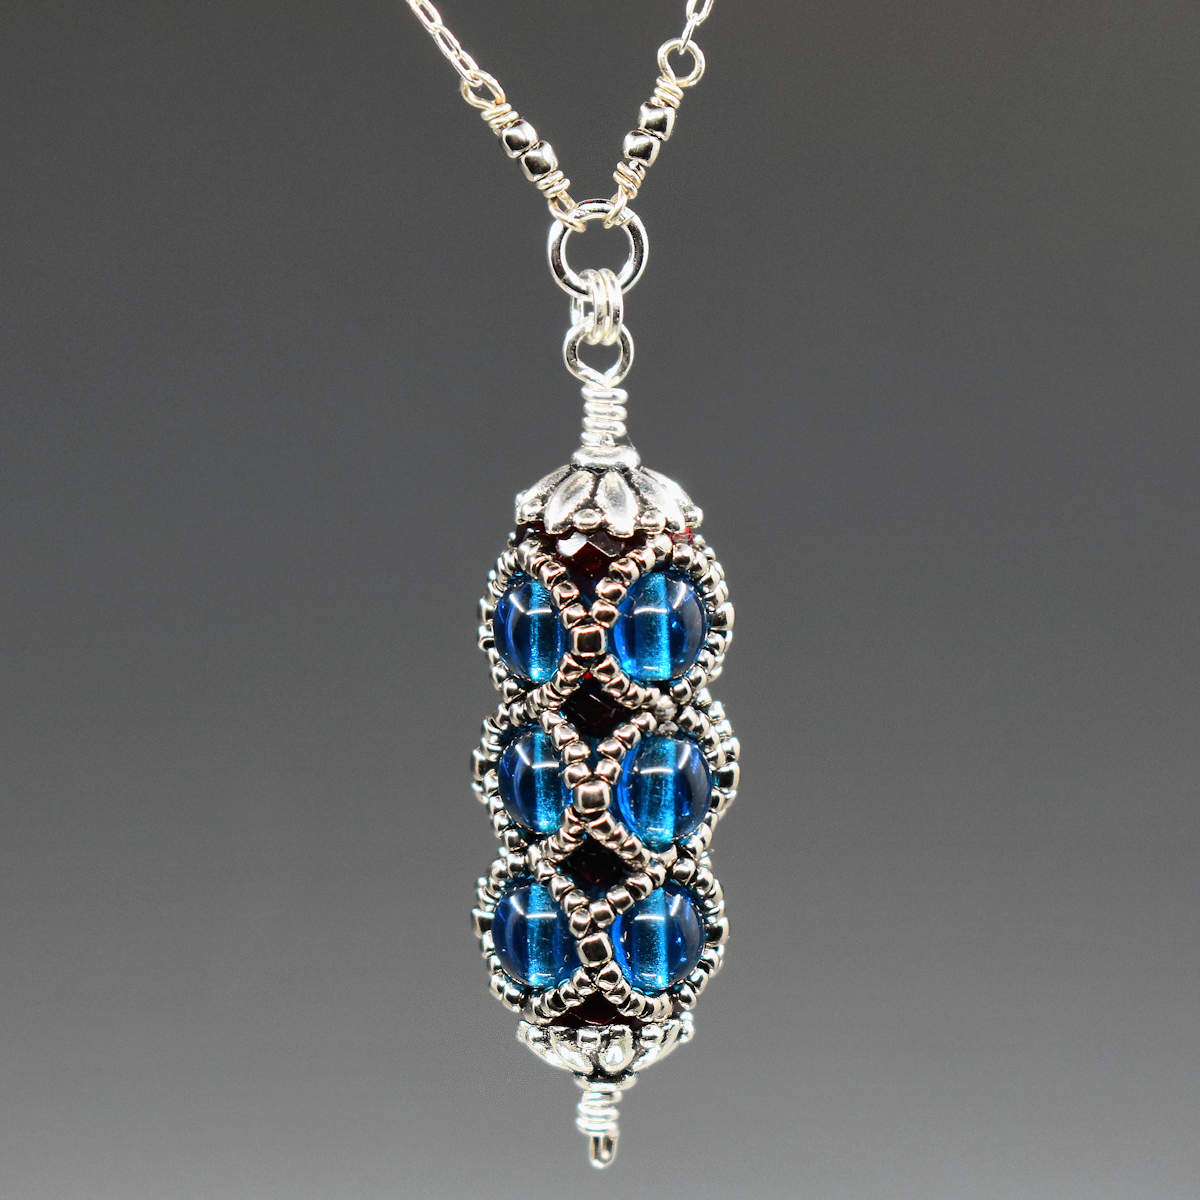 A capri blue and silver pendant against a gray background. The pendant is a very columnar shape made from smooth round capri blue beads. There is an overlaid netting of silver seed beads and the pendant is capped with a silver flower bead cap.